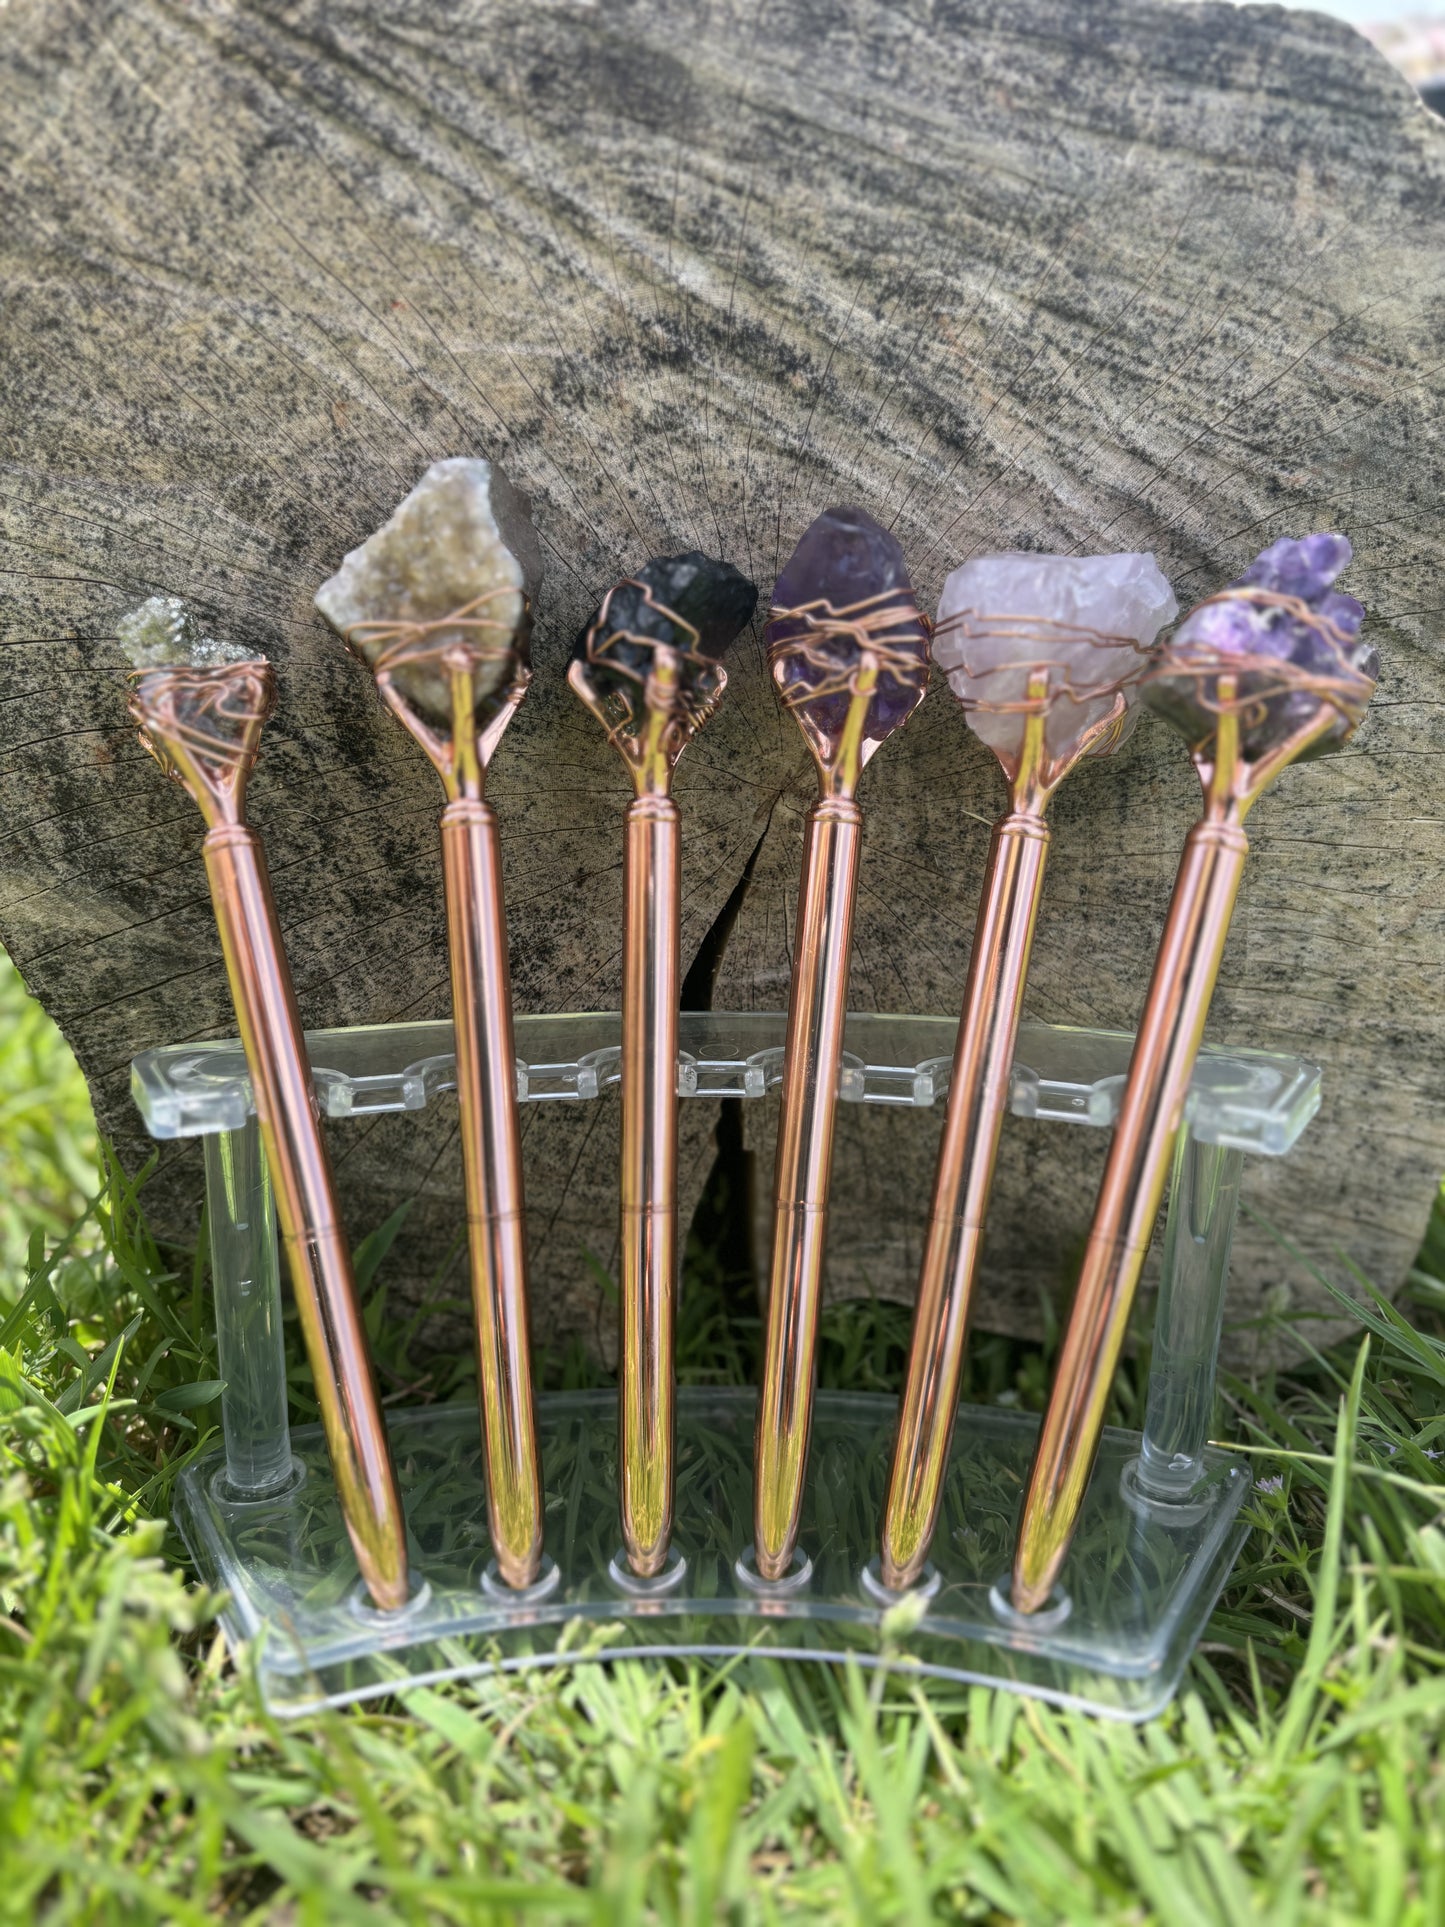 Crystal Intention pens